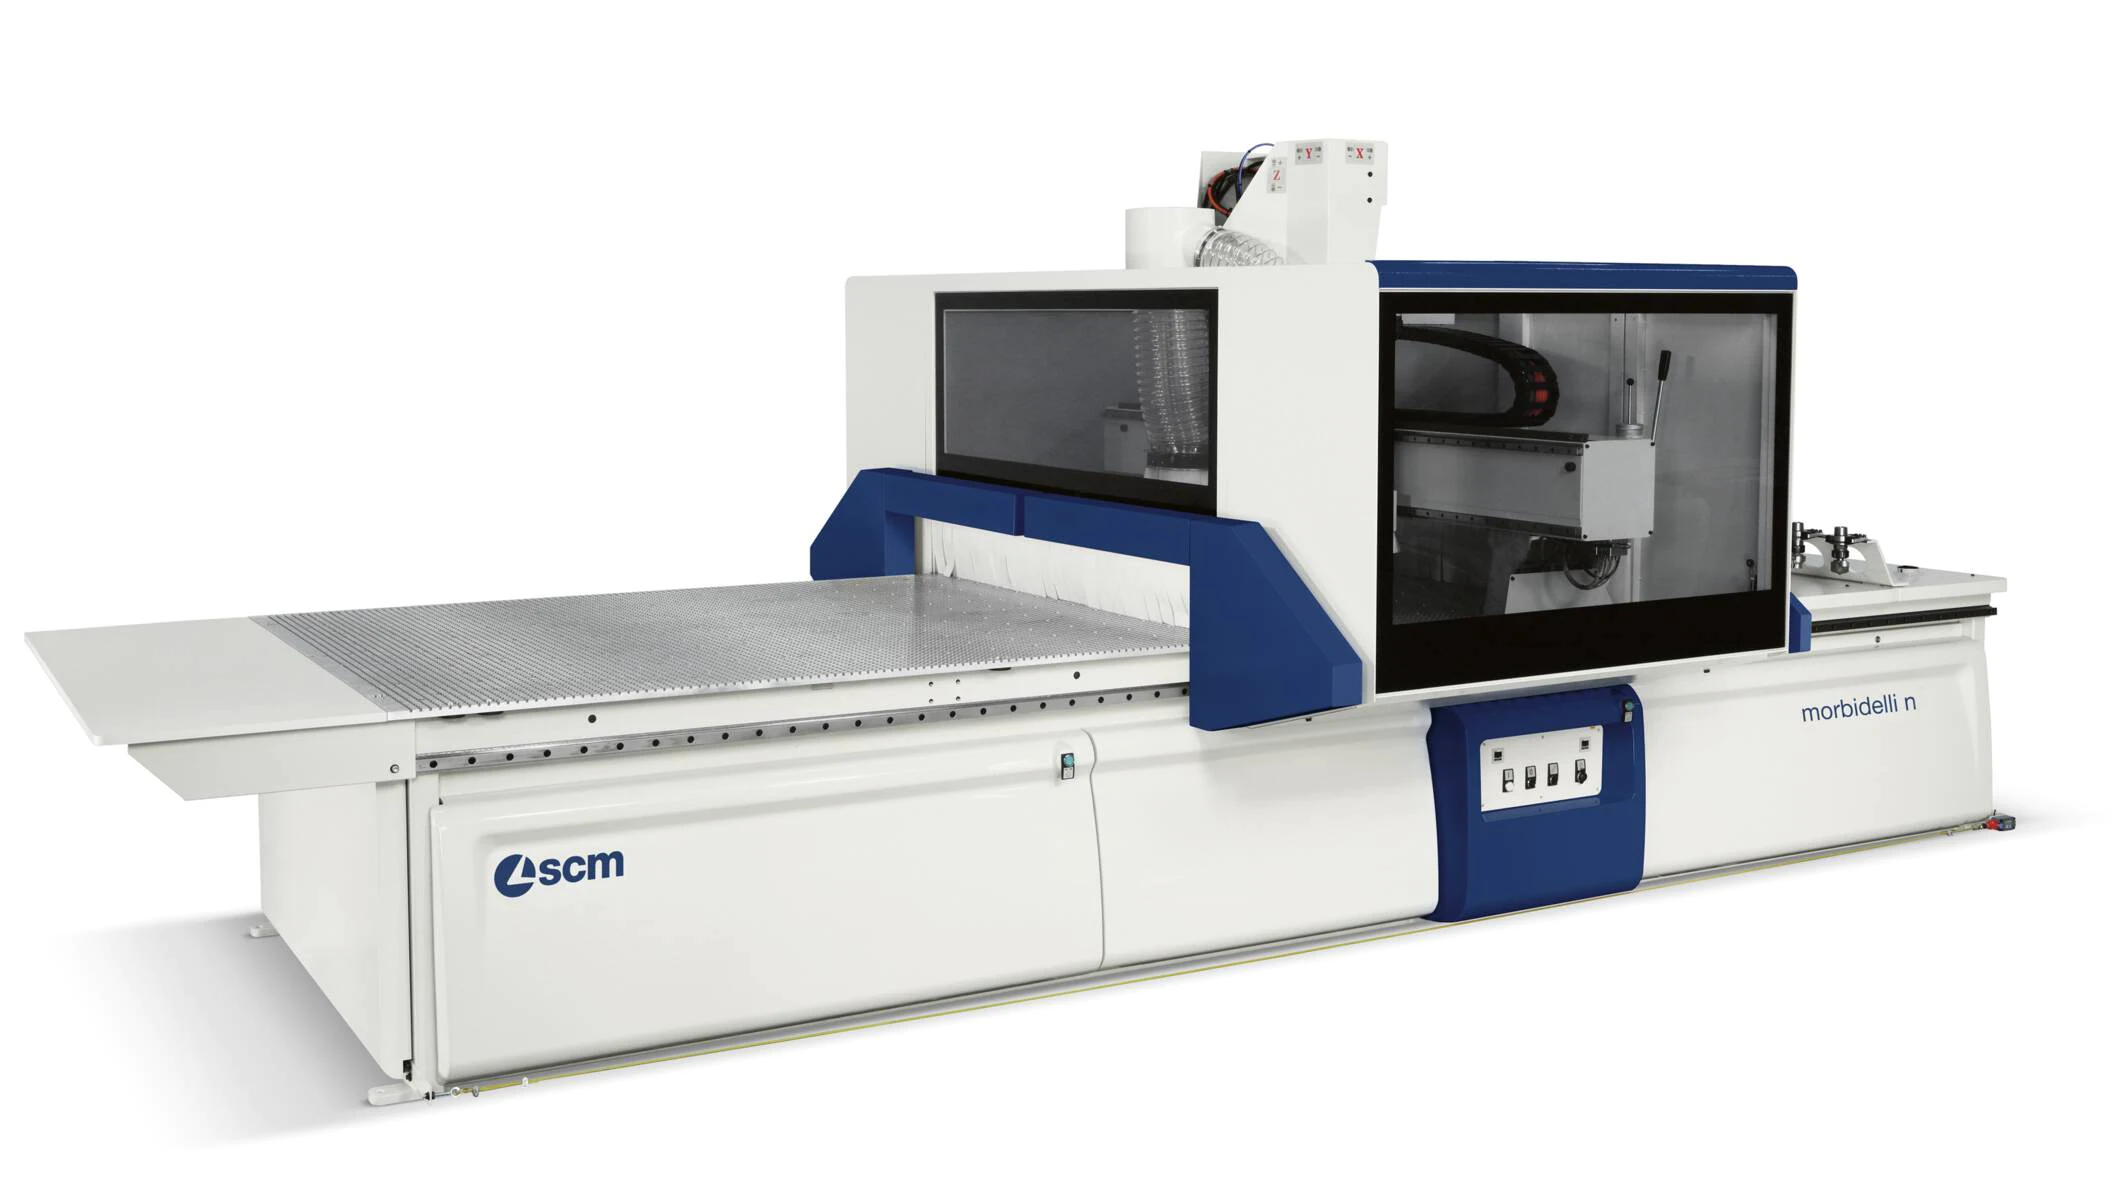 NEW SCM Morbidelli CNC Nesting Machining Center for Routing & Drilling